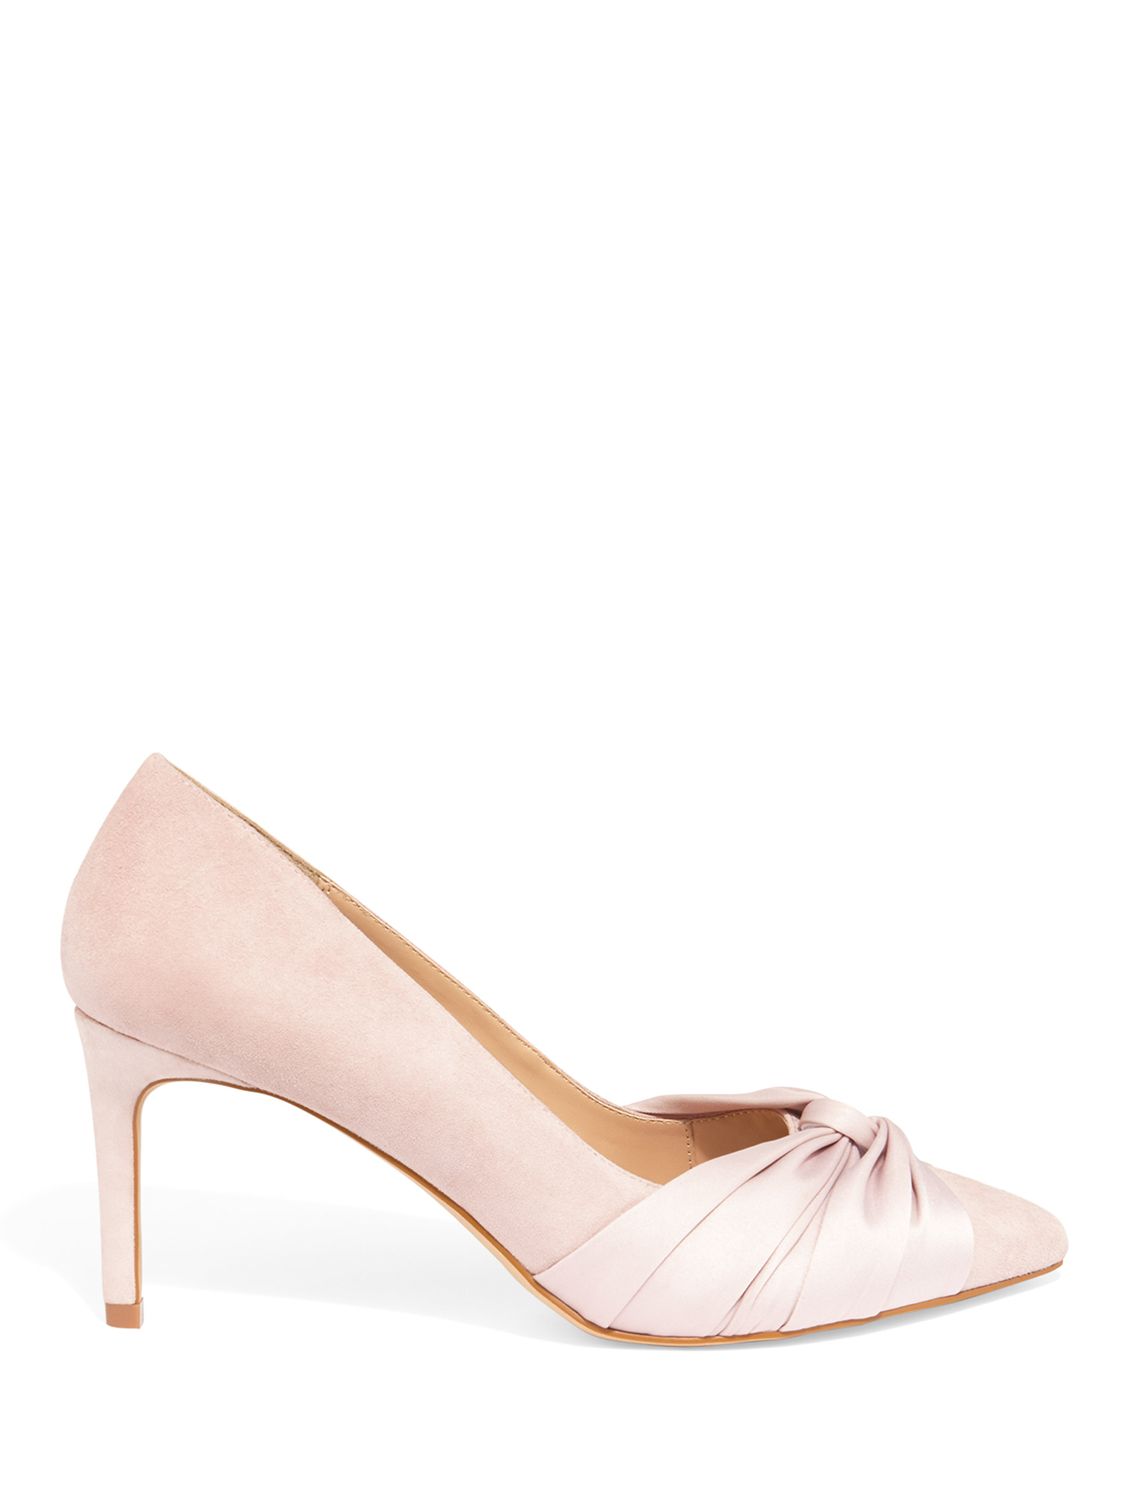 Women's Shoes - Pink, Court Shoes 